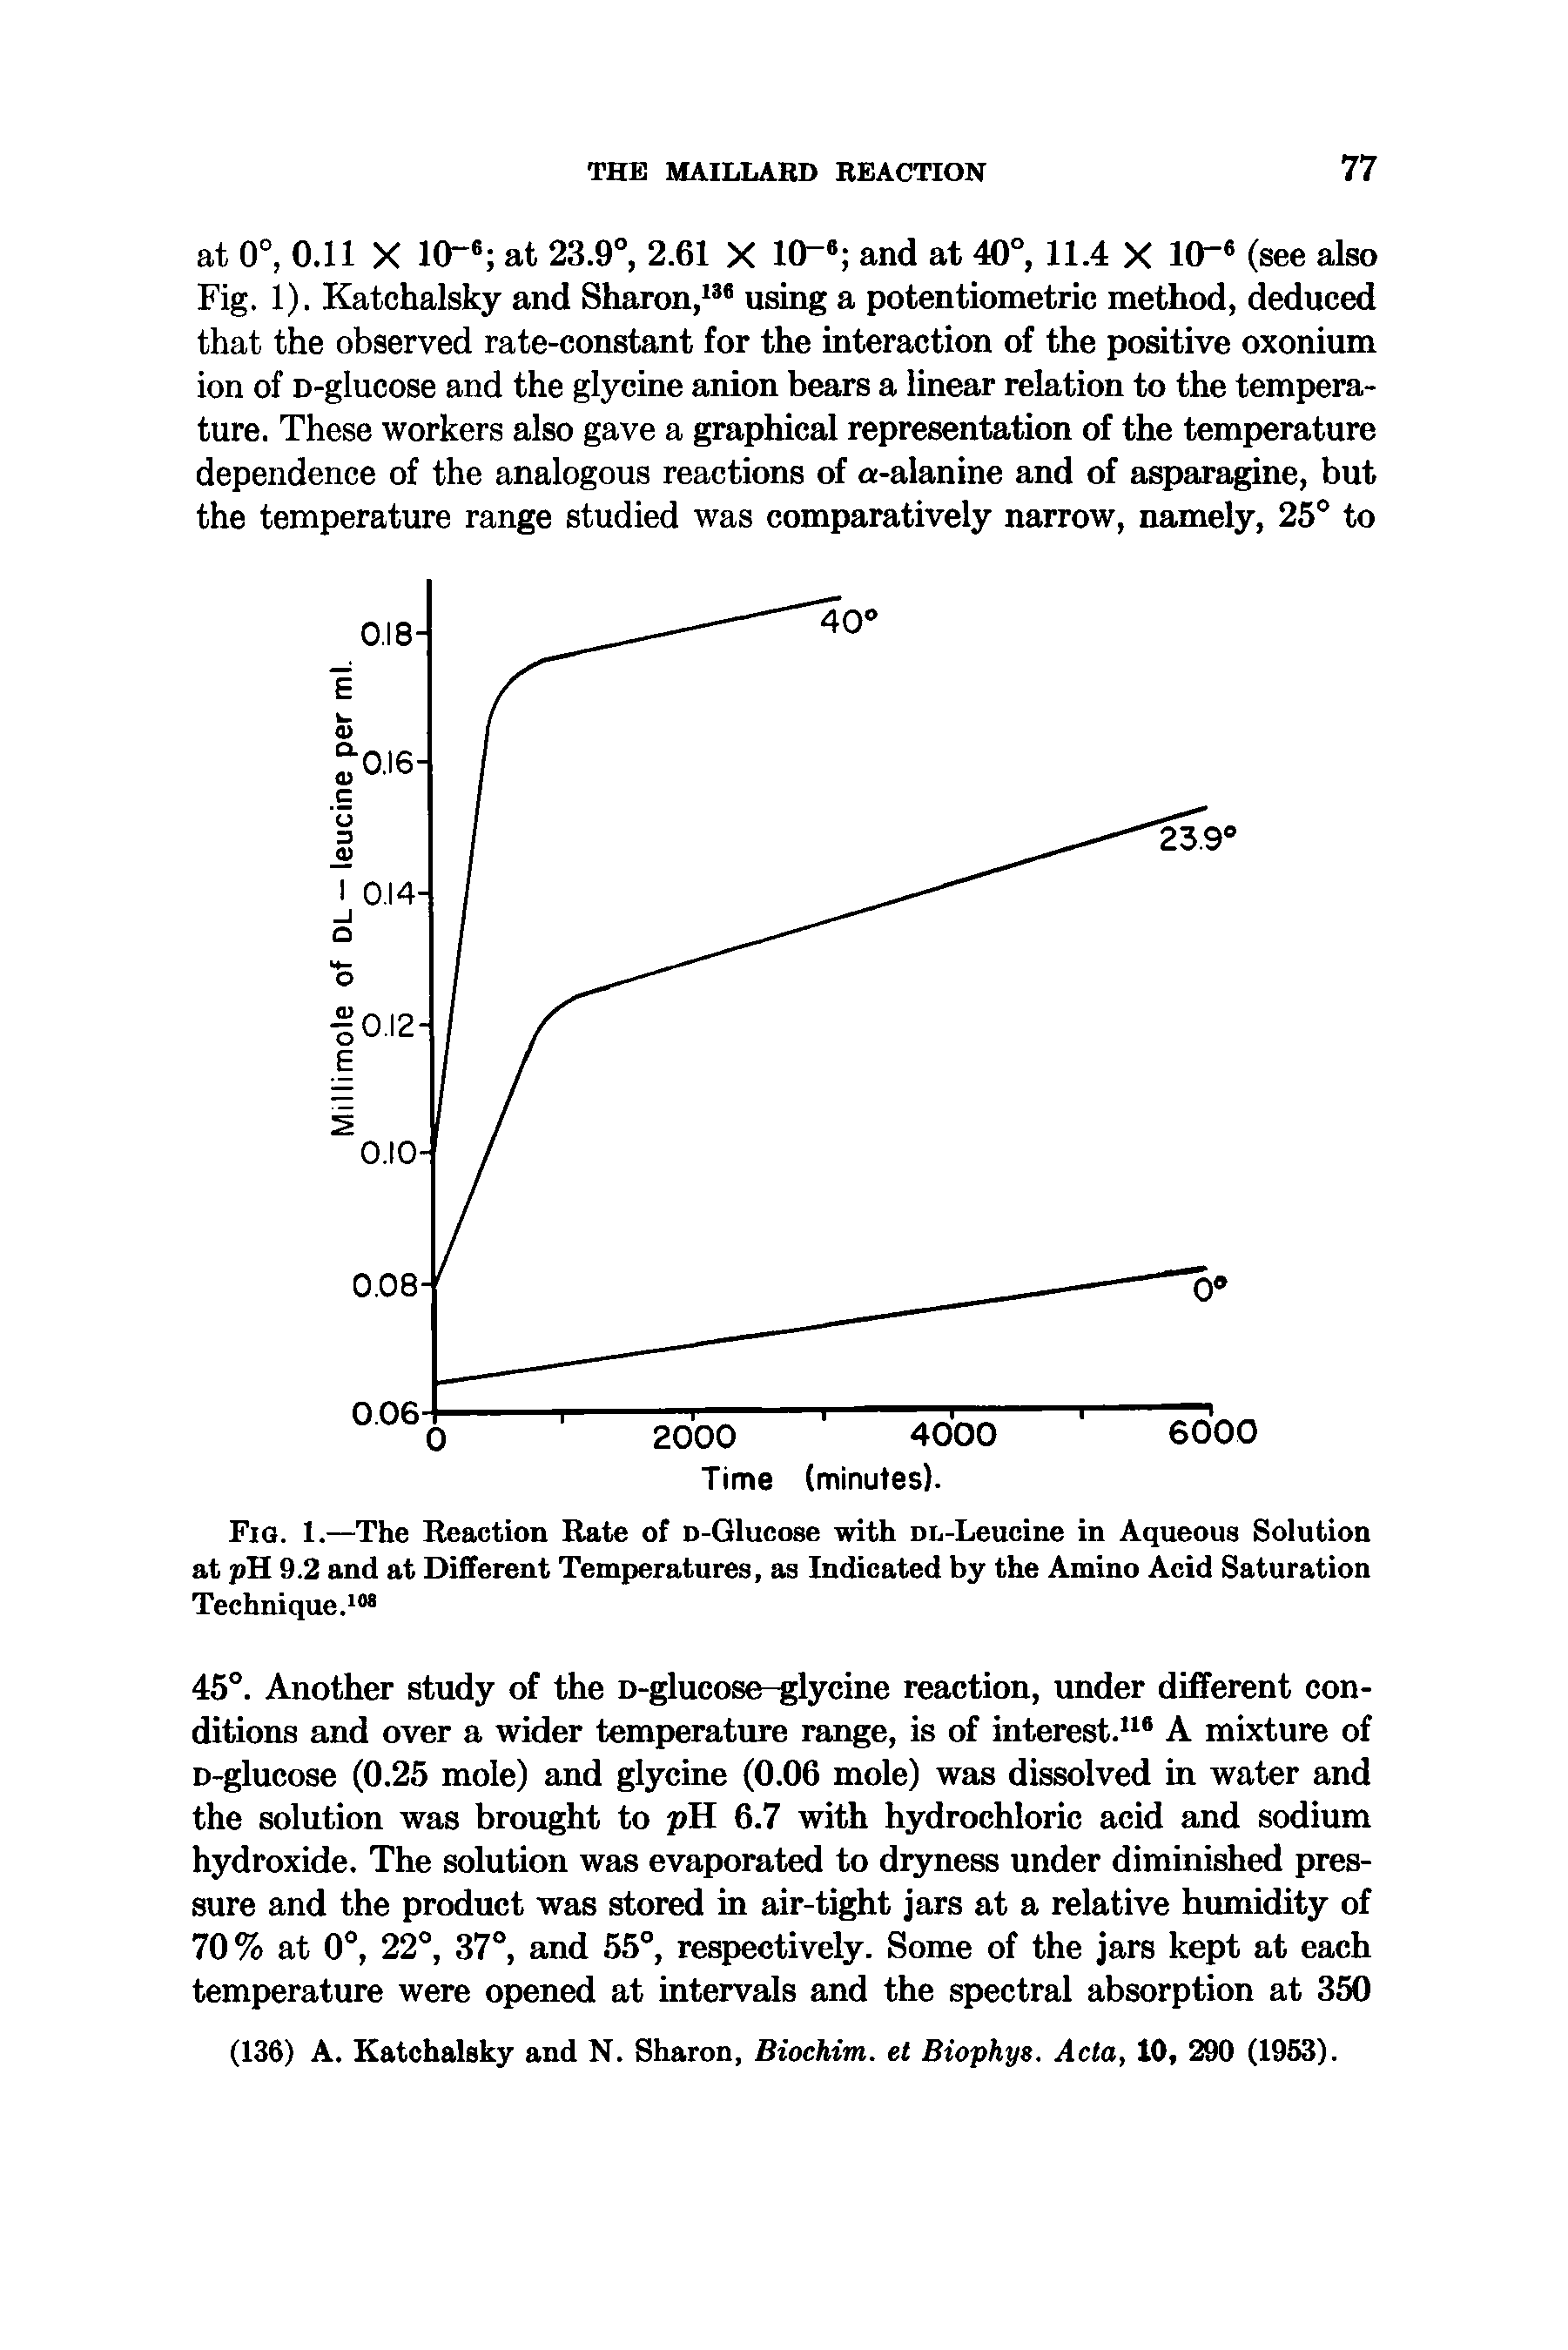 Fig. 1.—The Reaction Rate of D-Glucose with DL-Leucine in Aqueous Solution at pH 9.2 and at Different Temperatures, as Indicated by the Amino Acid Saturation Technique.108...